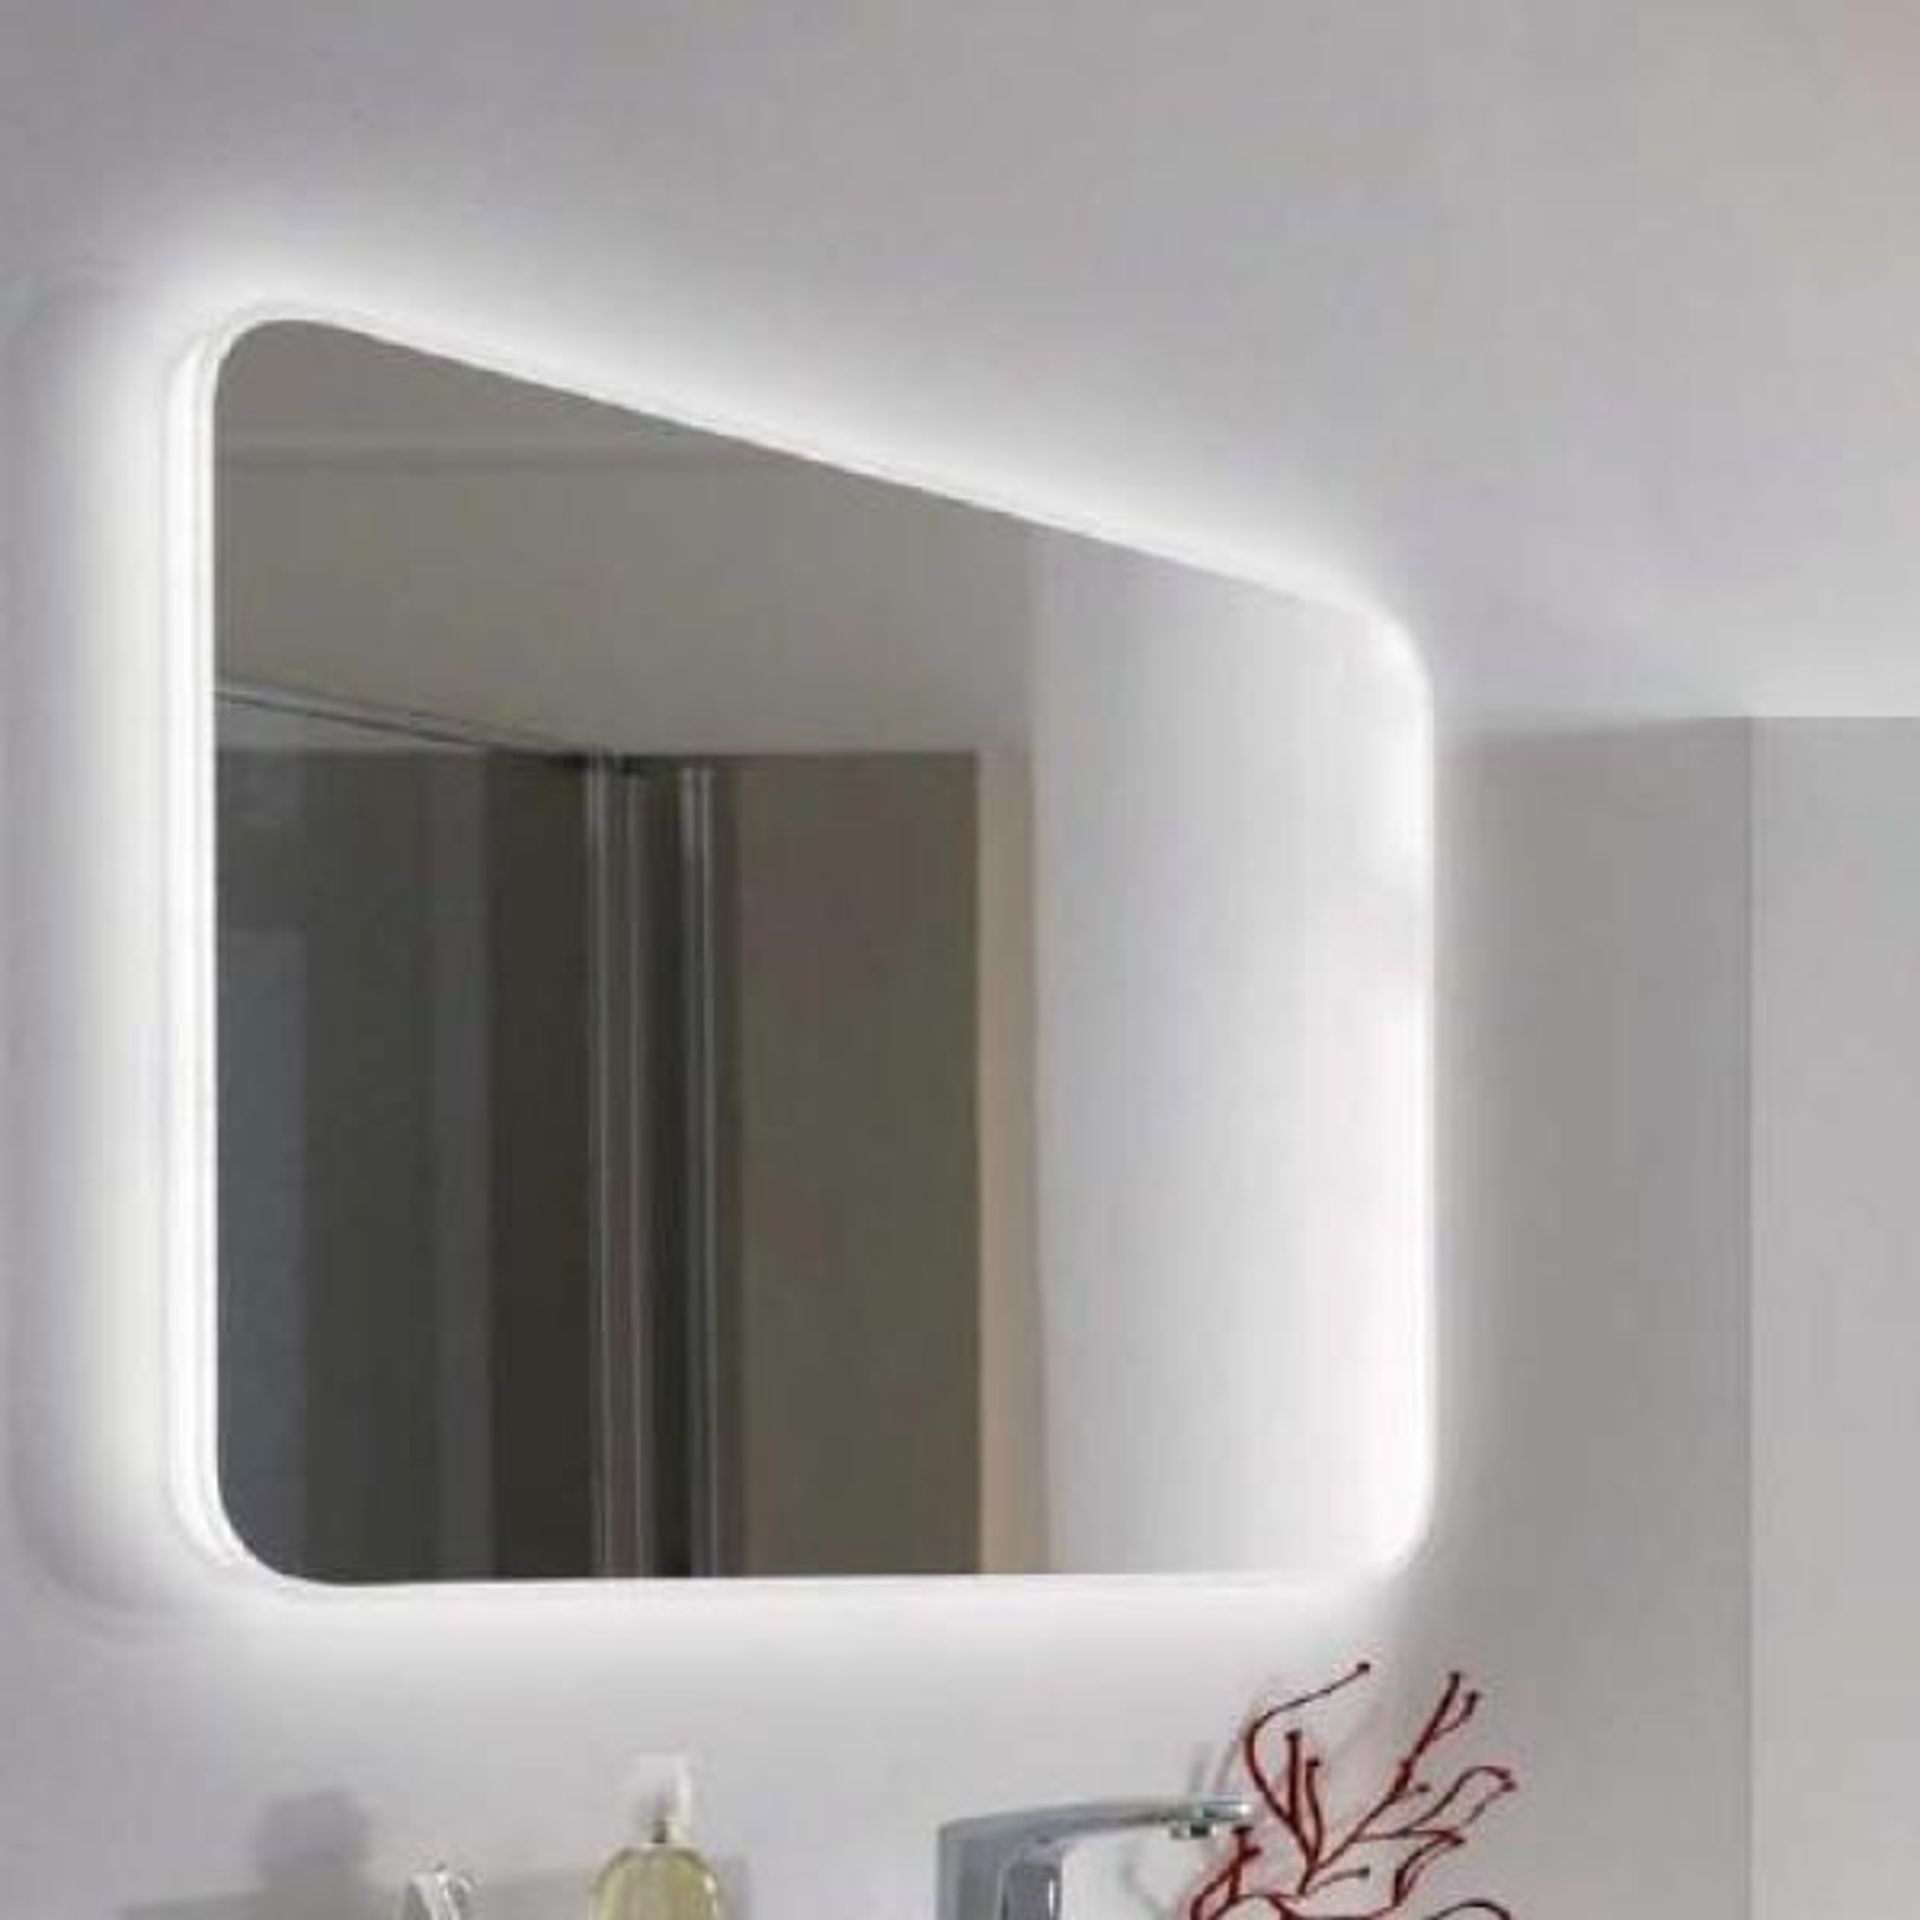 NEW (NS8) 1000x700mm Myday Illuminated Mirror. RRP £599.99. The aesthetics of stripped-down de...